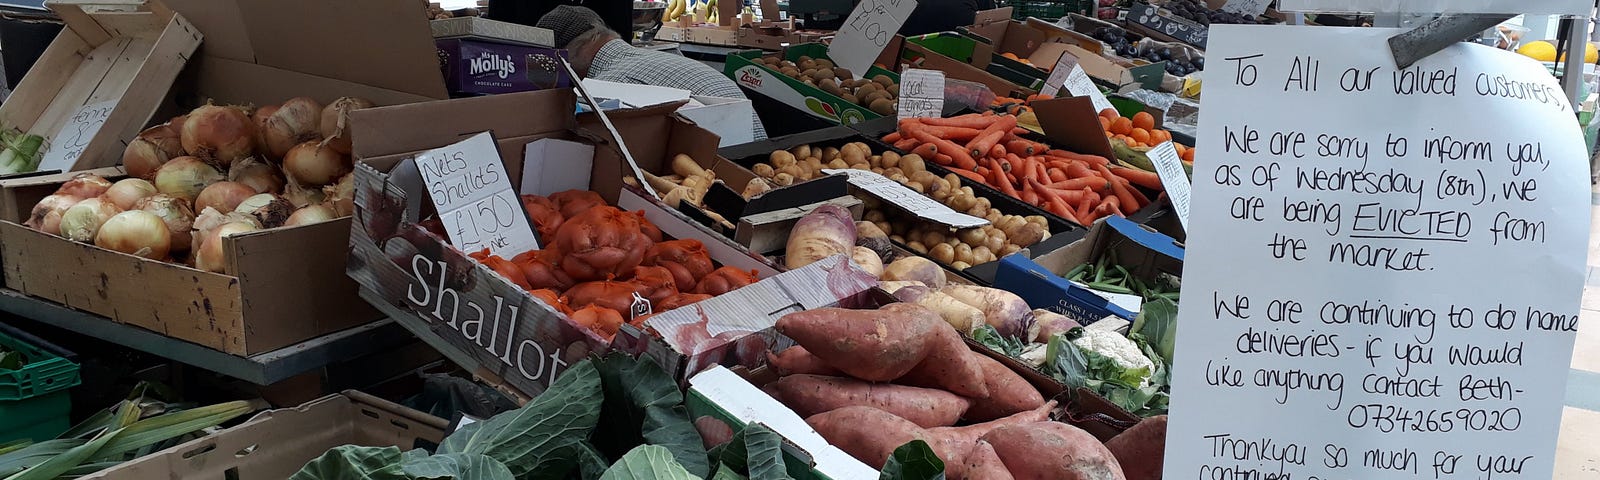 fruit and vegetable stall Lincoln Central Market facing eviction